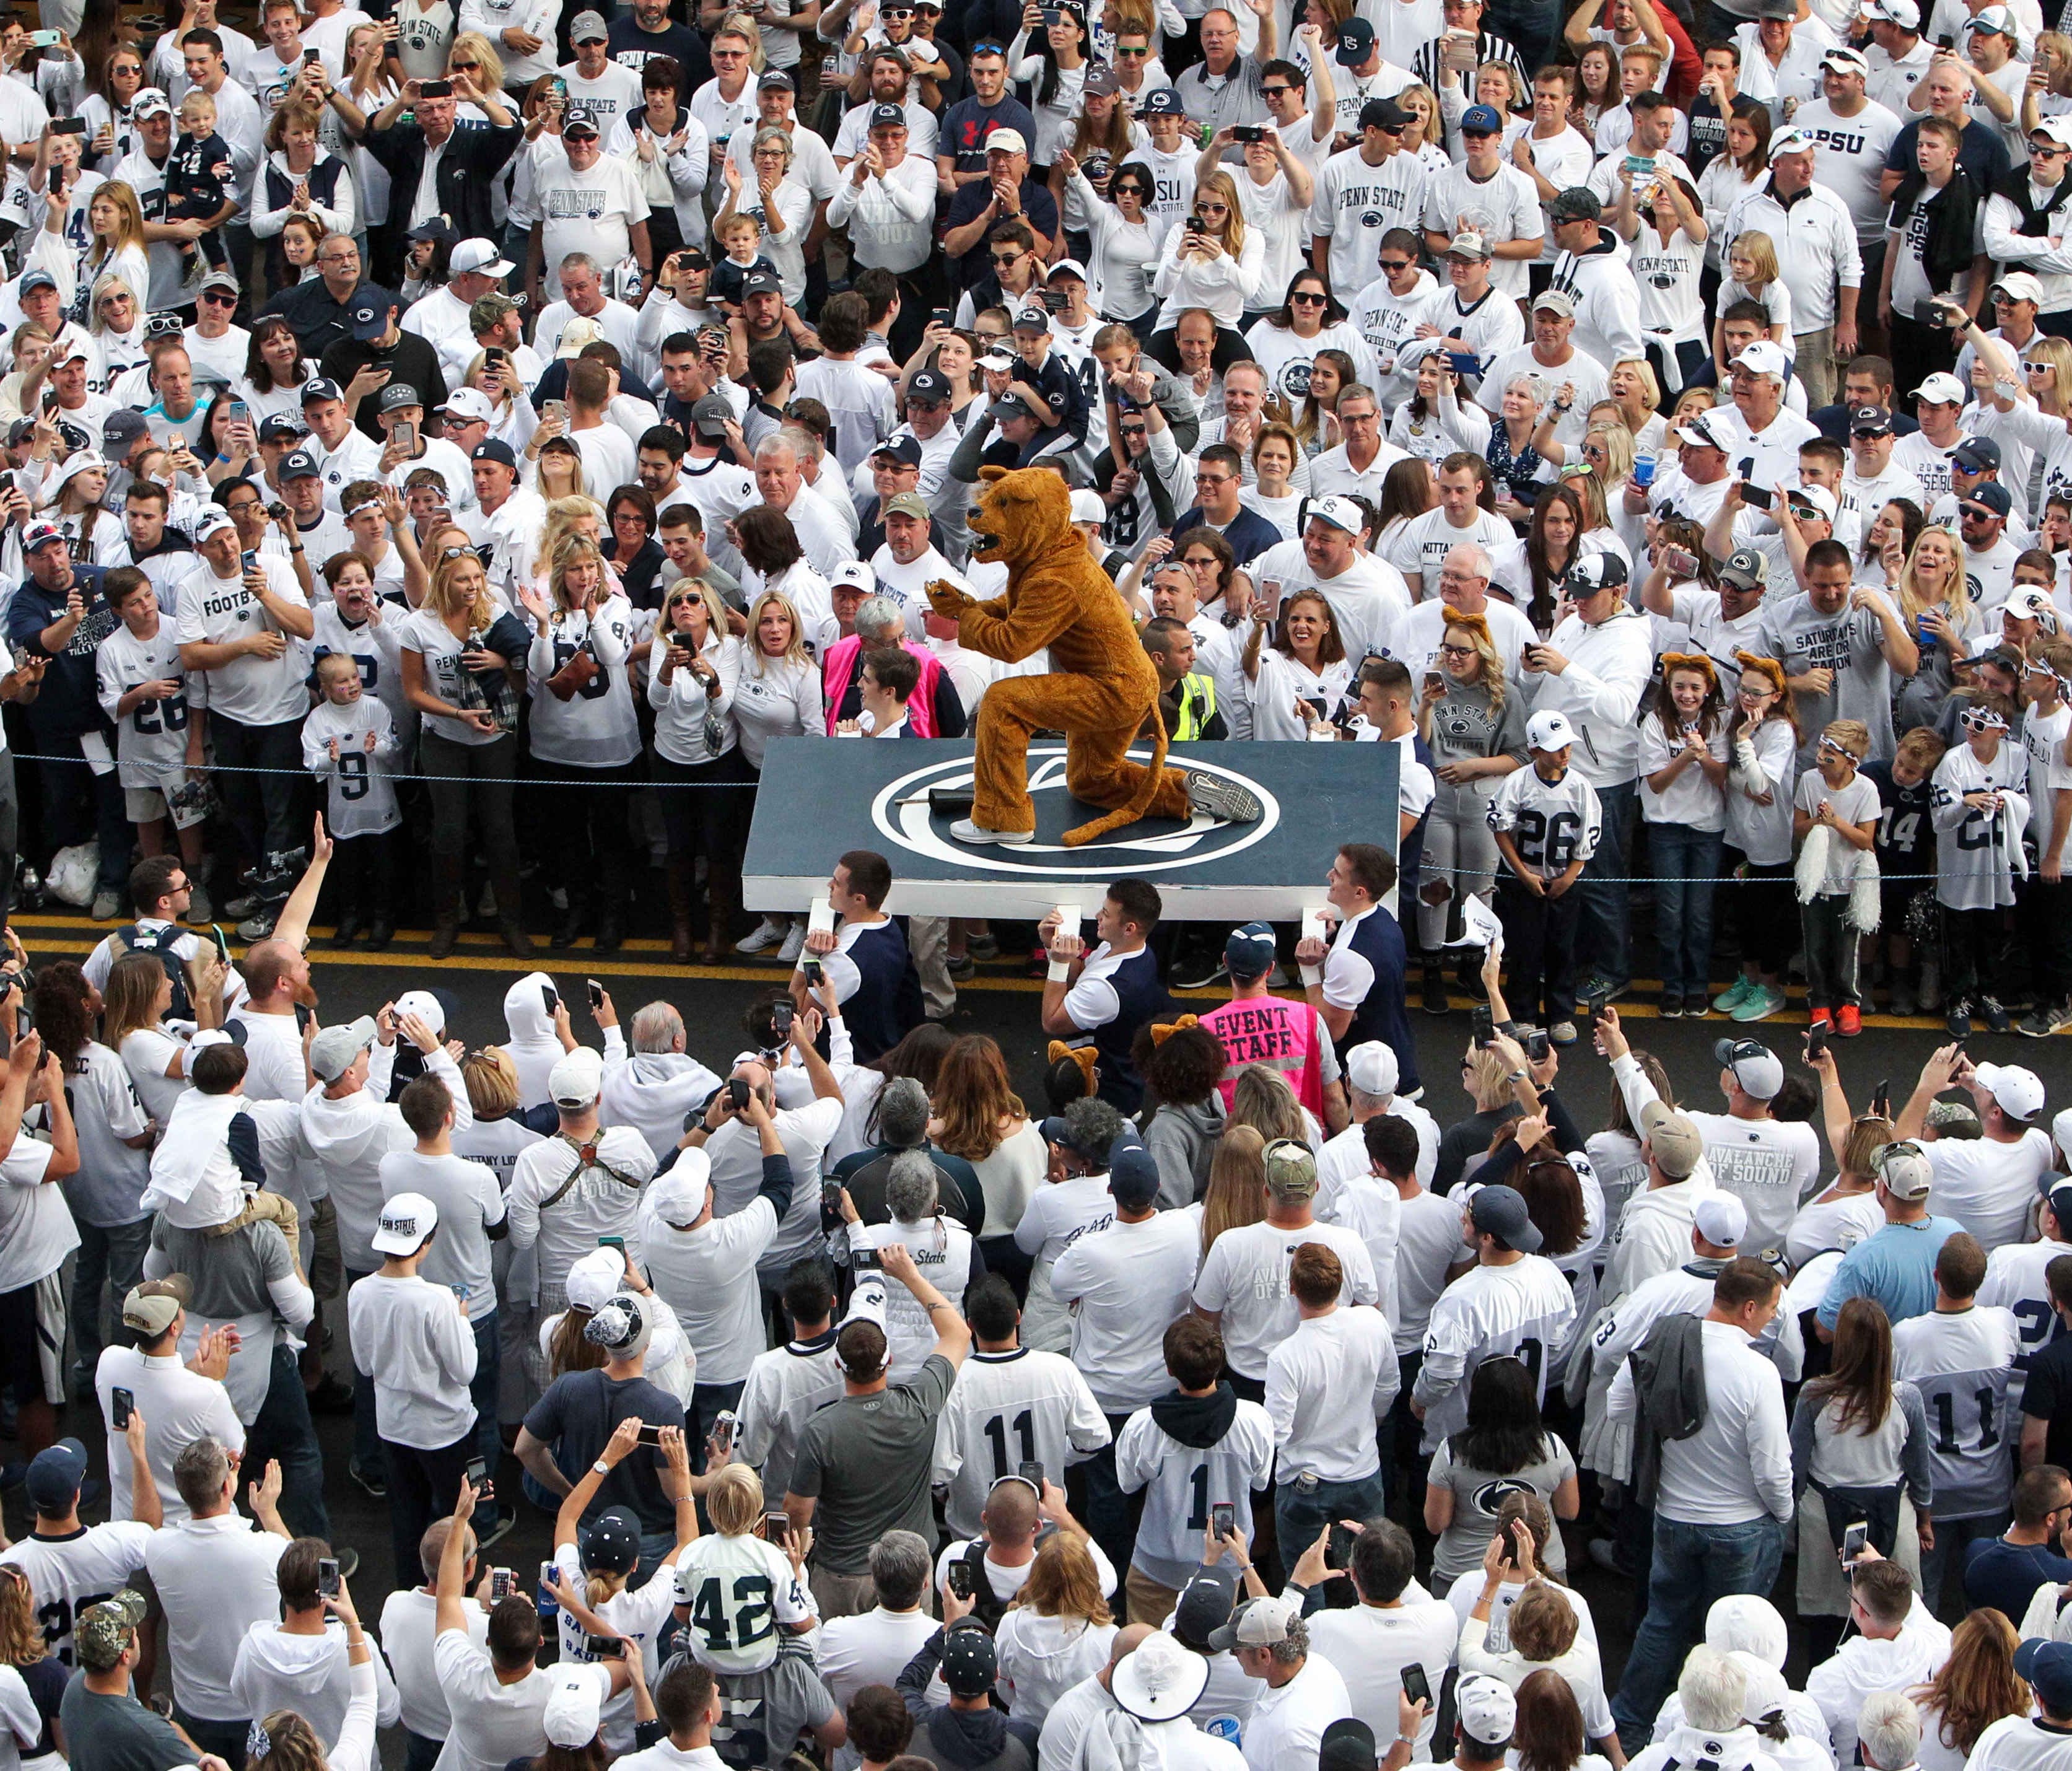 Penn State fans were ready for Michigan.